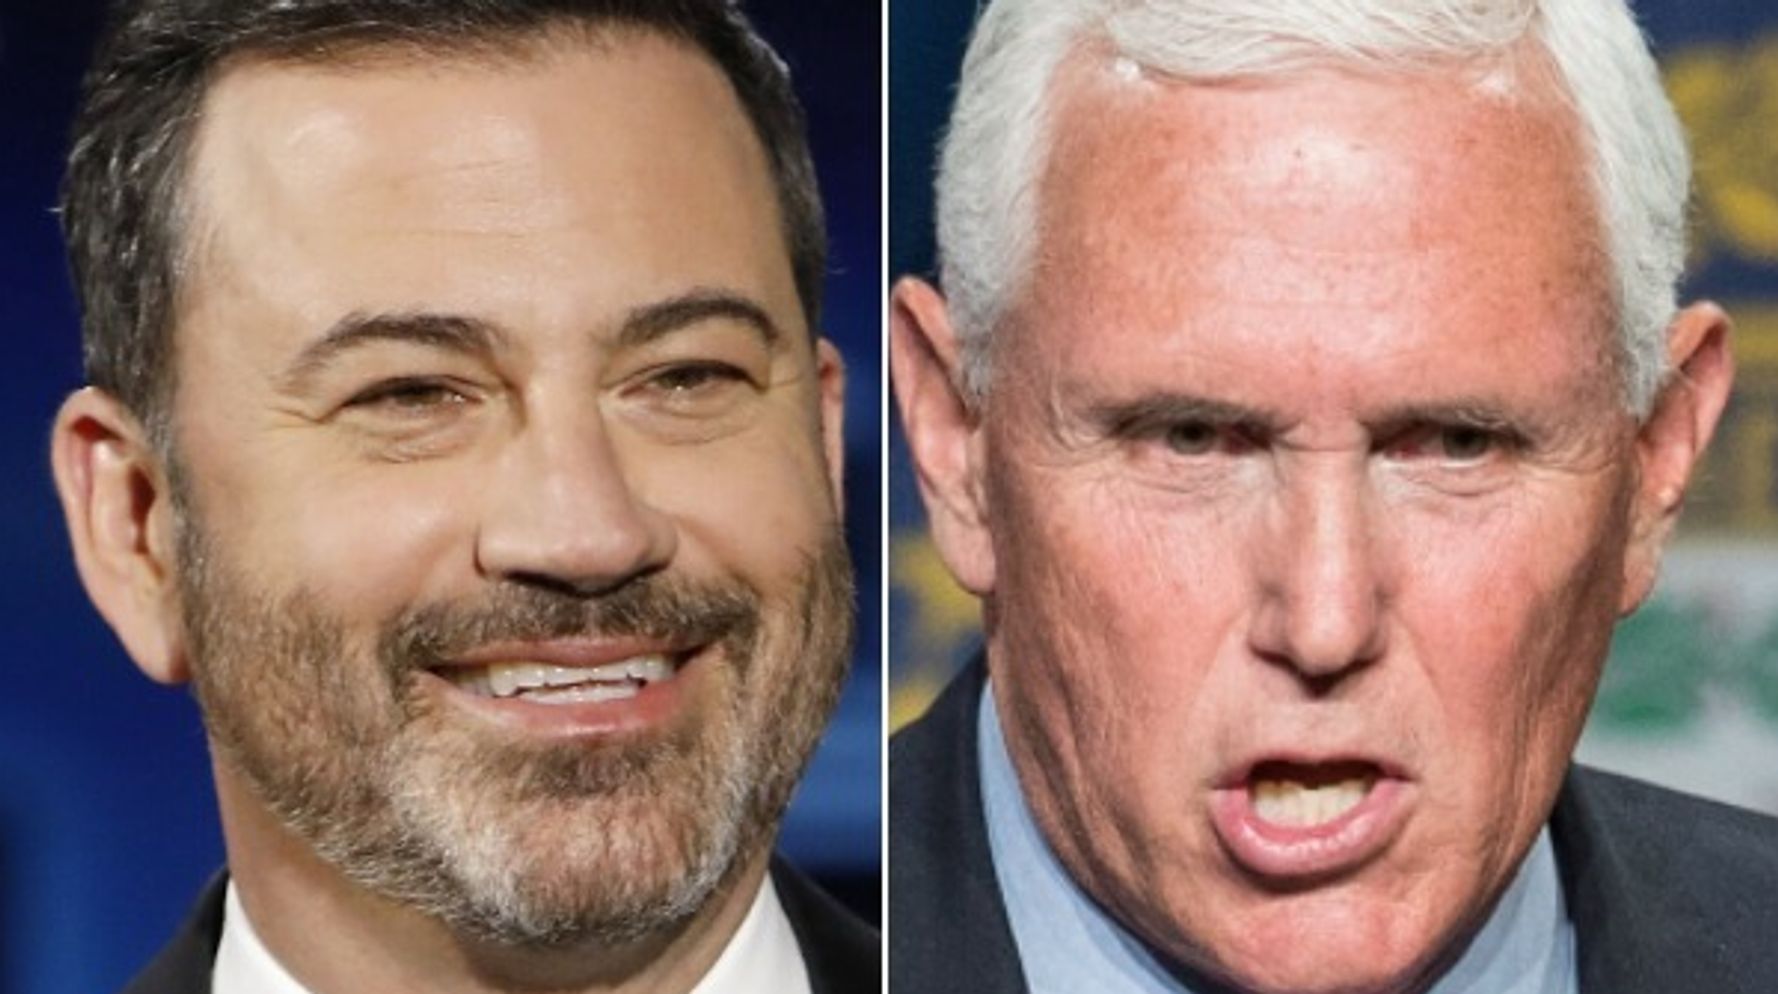 Jimmy Kimmel Taunts Mike Pence With A Perfect Post-Trump Job Opportunity